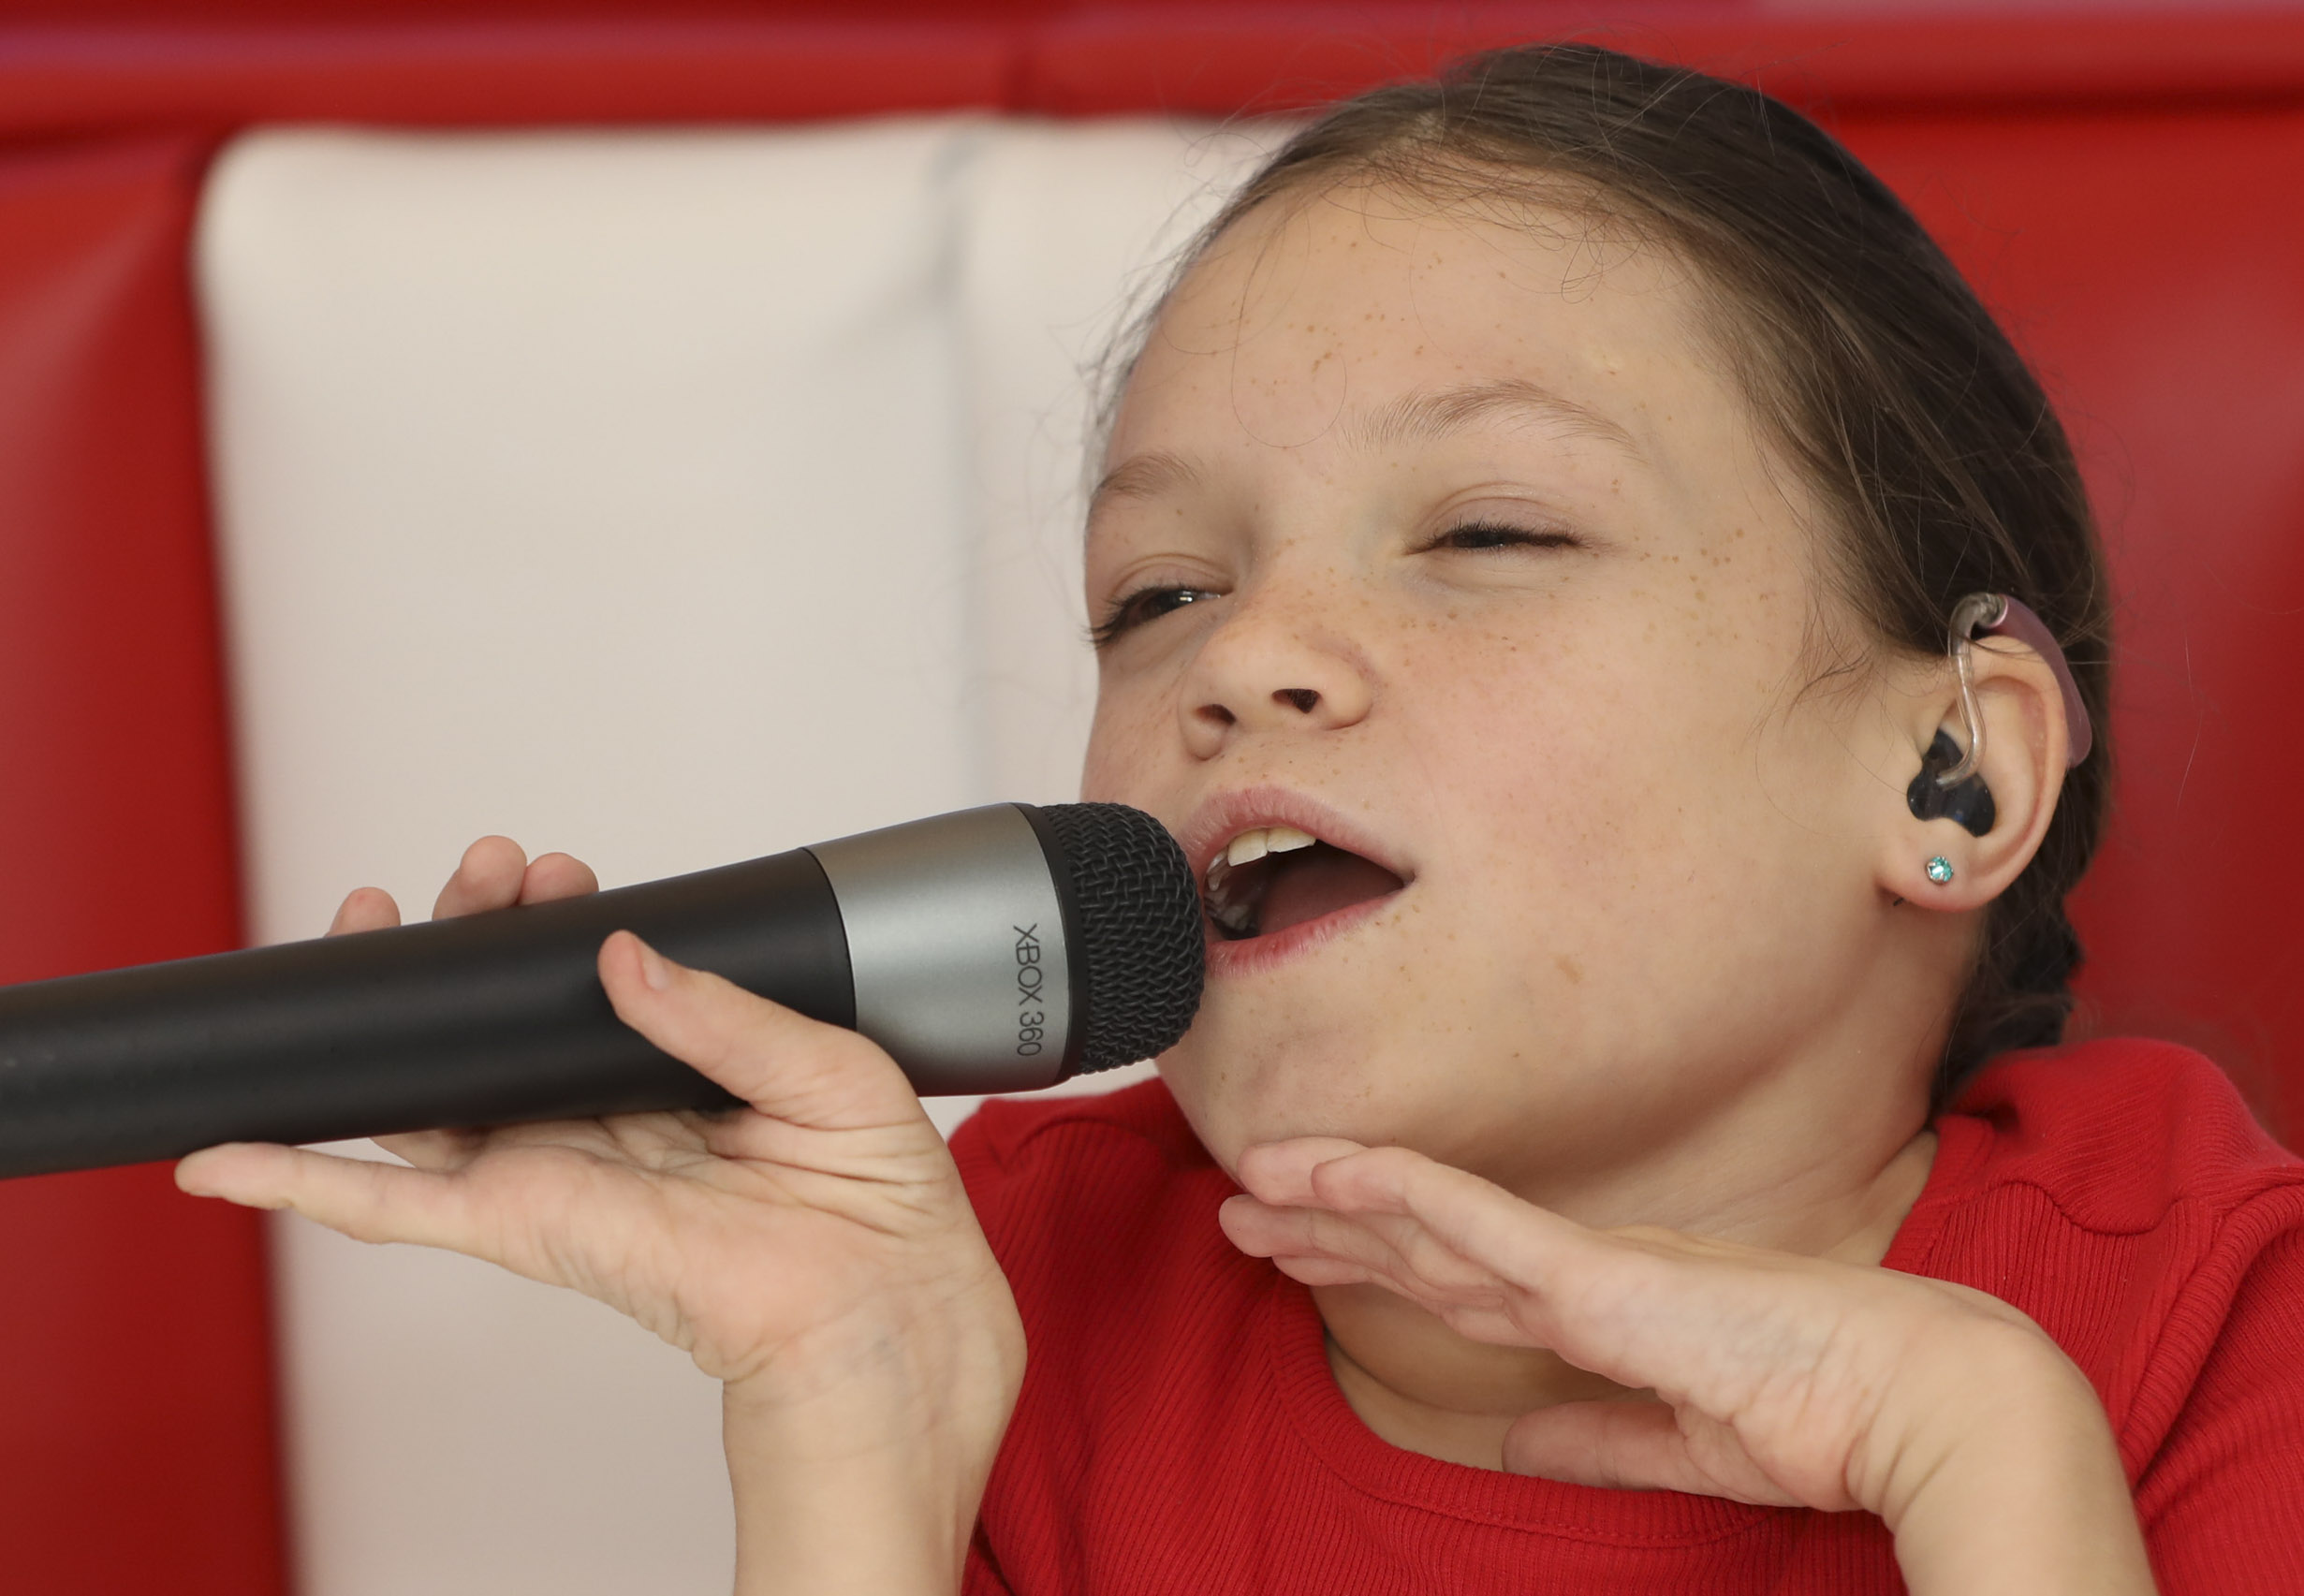 Amazing Gracie will “melt hearts” at concert in aid of safety centre